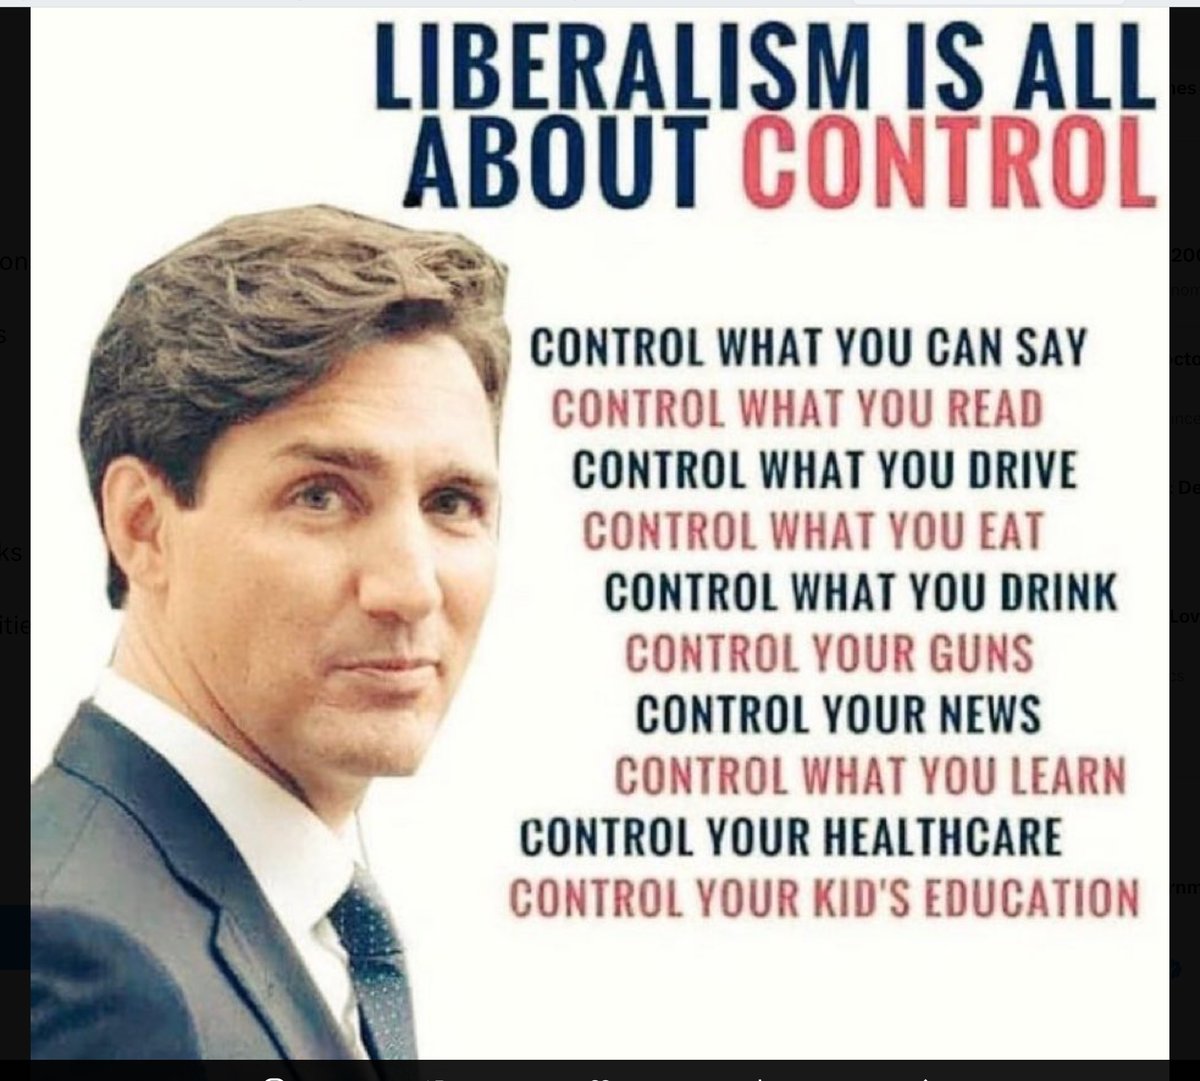 @globalnews @JustinTrudeau NEEDS to be GONE. He’s entered our homes, families, businesses, there isn’t anything this corrupt pos won’t take control of. Between him and @theJagmeetSingh attacking our grocers,  Cdns will loose independent grocers to  feed  us  crickets. #TrudeaMustGo